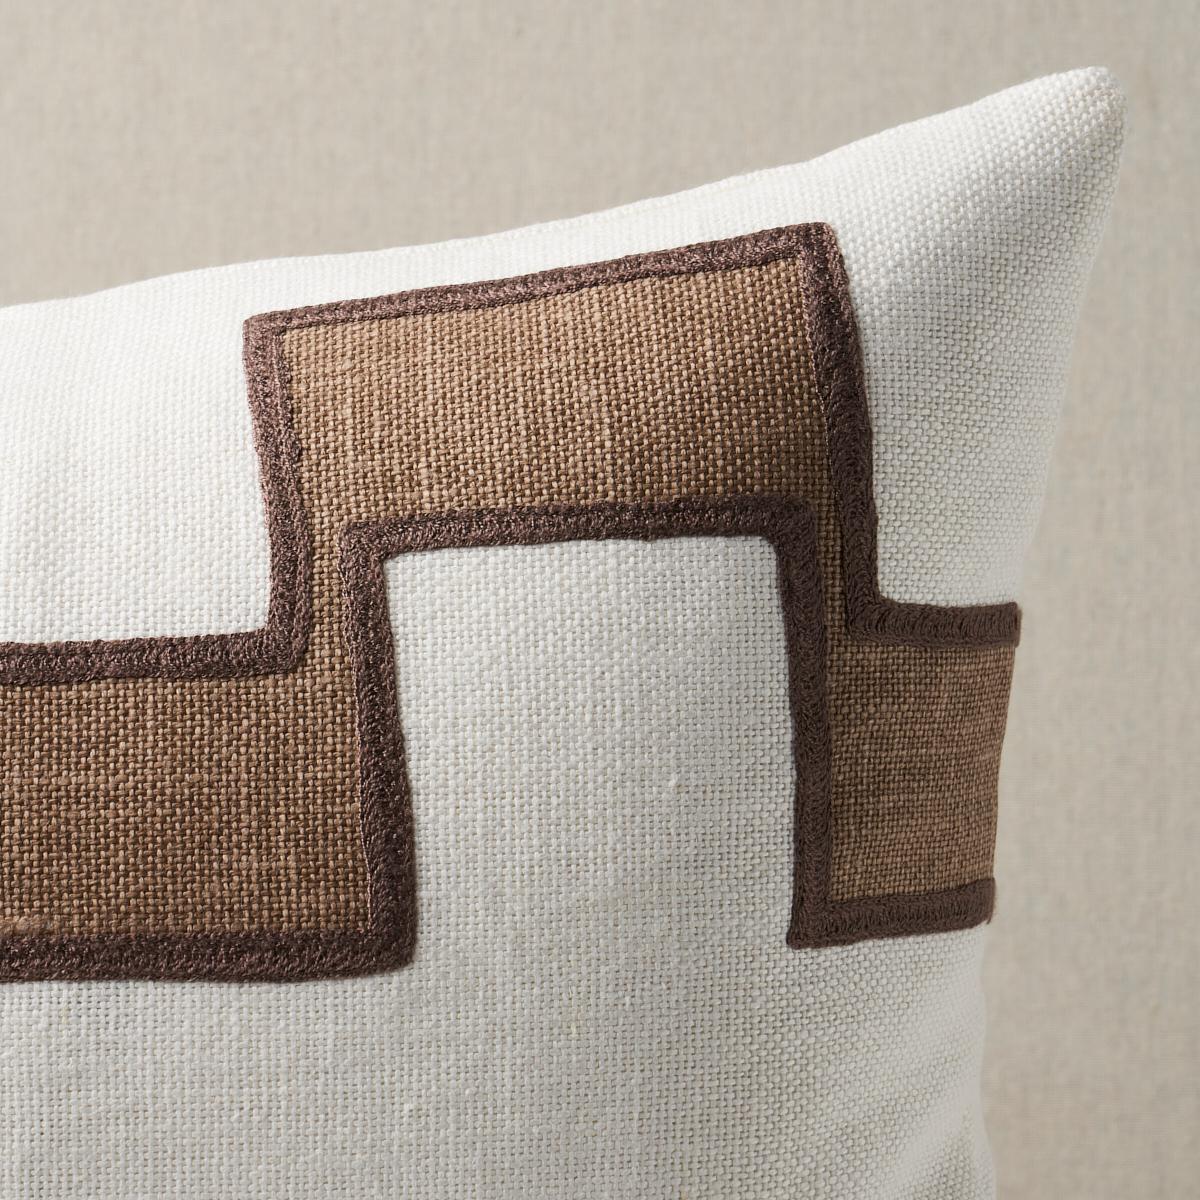 This pillow features Dixon Embroidered Print Linen with a knife edge finish. A series of stepped lines is handprinted with pigment ink on a linen ground and then embroidered along the edges to amp up the bold and graphic impact of this large-scale